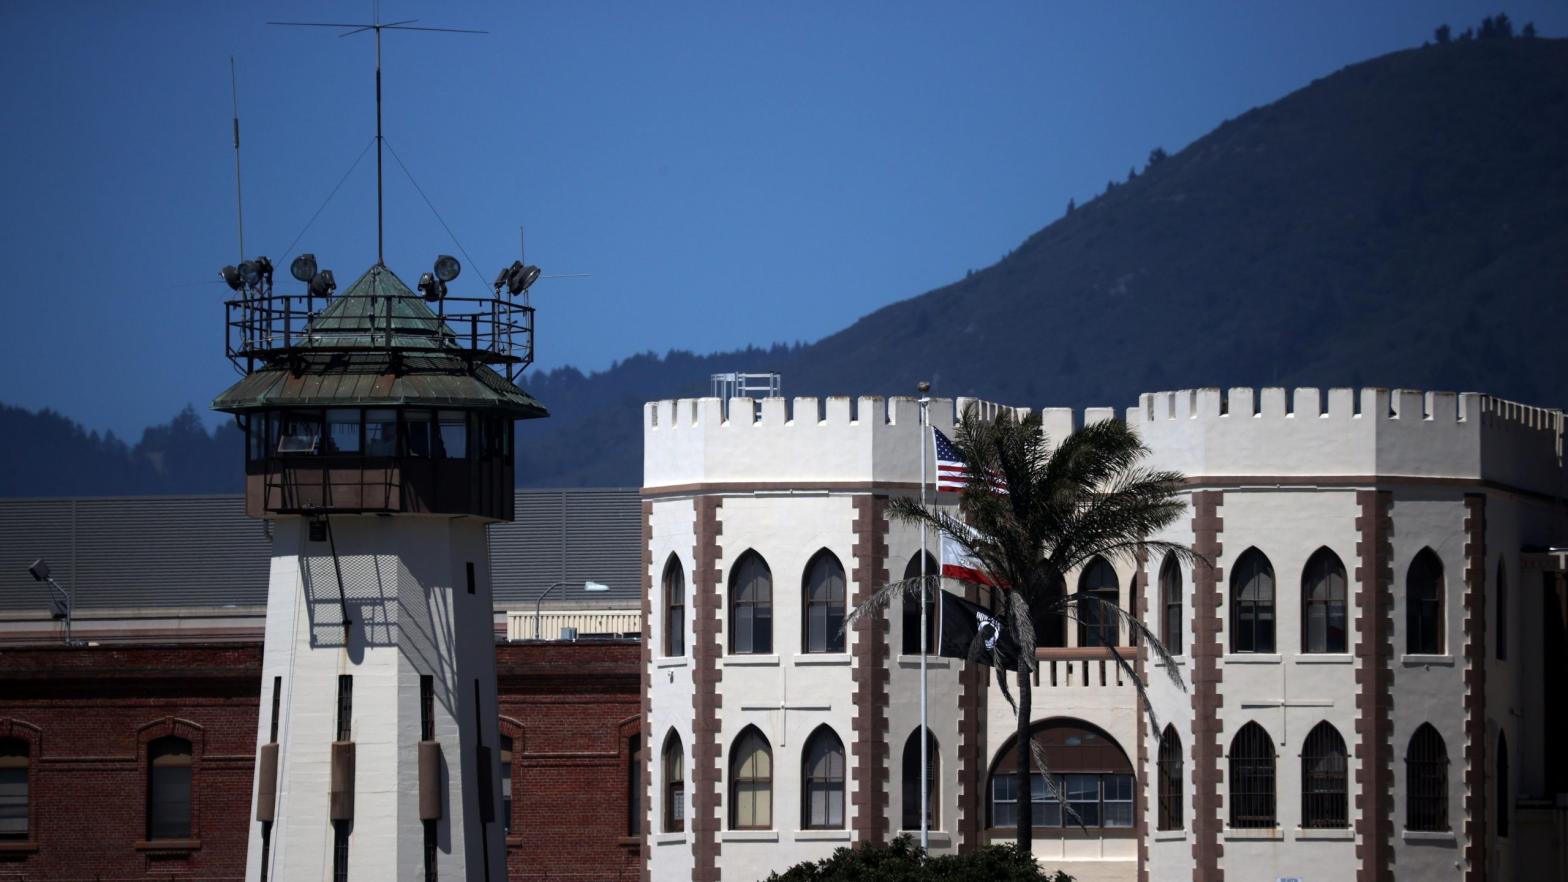 An exterior view of San Quentin State Prison in San Francisco, California, where Global Tel Link (GTL) is the sole provider of prison phone calls. (Photo: Justin Sullivan, Getty Images)